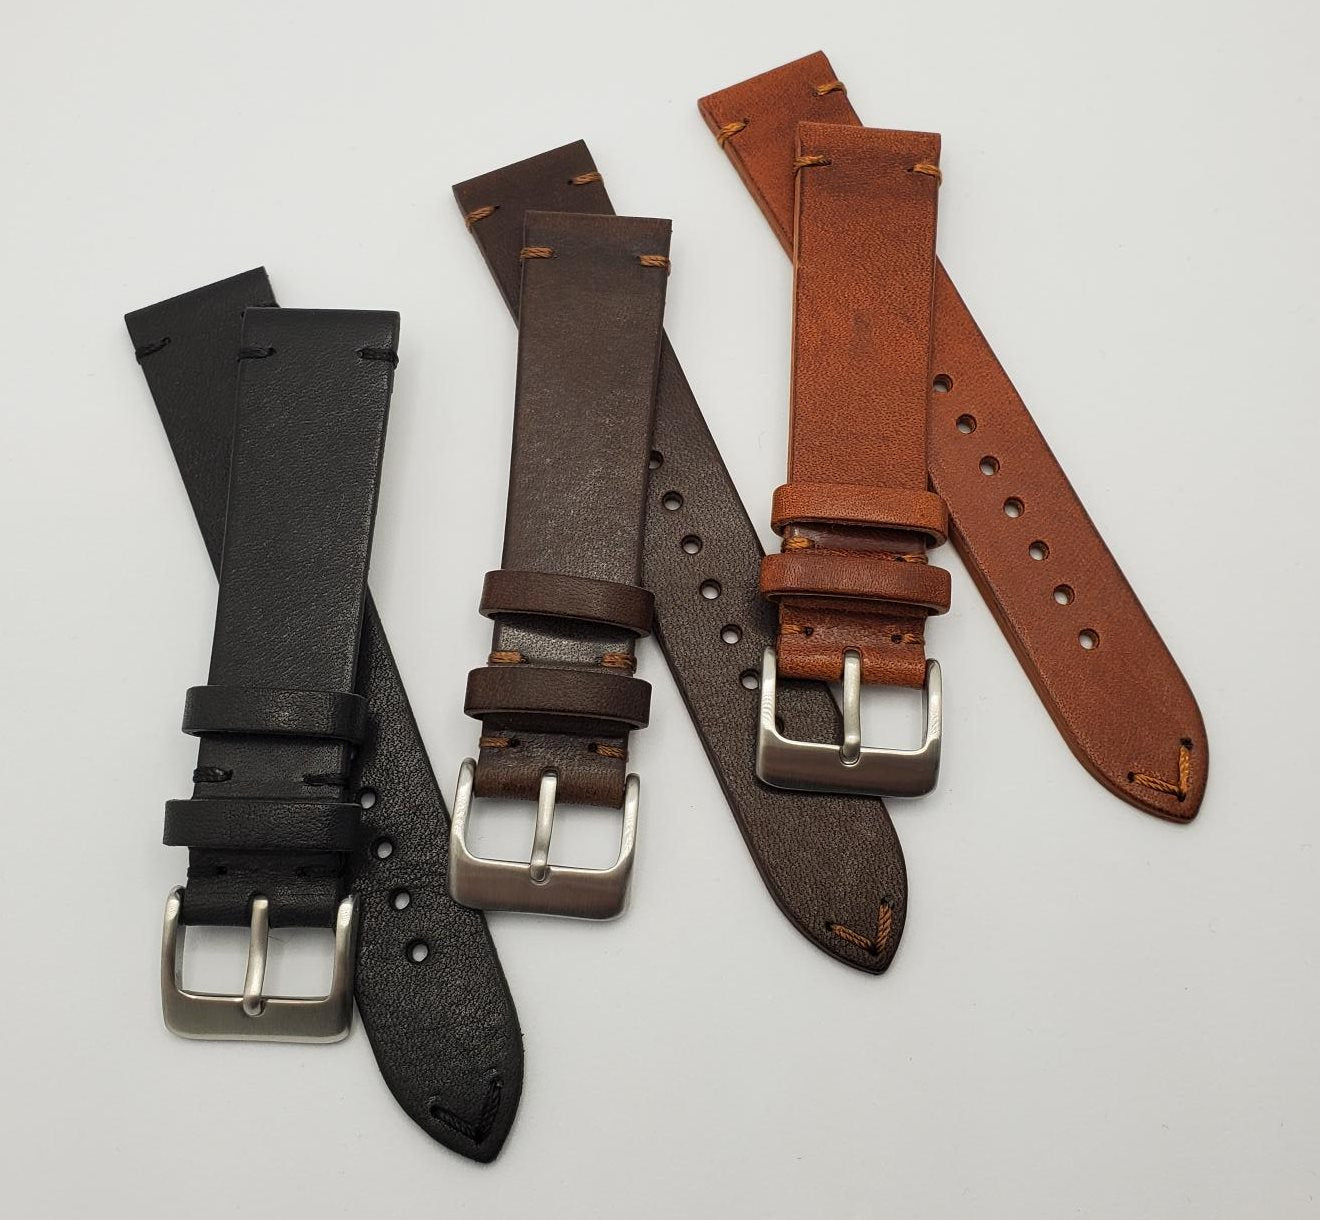 Classic Vintage Leather Strap with Accent Stitching and Steel Buckle (Avail. Black, Brown, Light Brown)